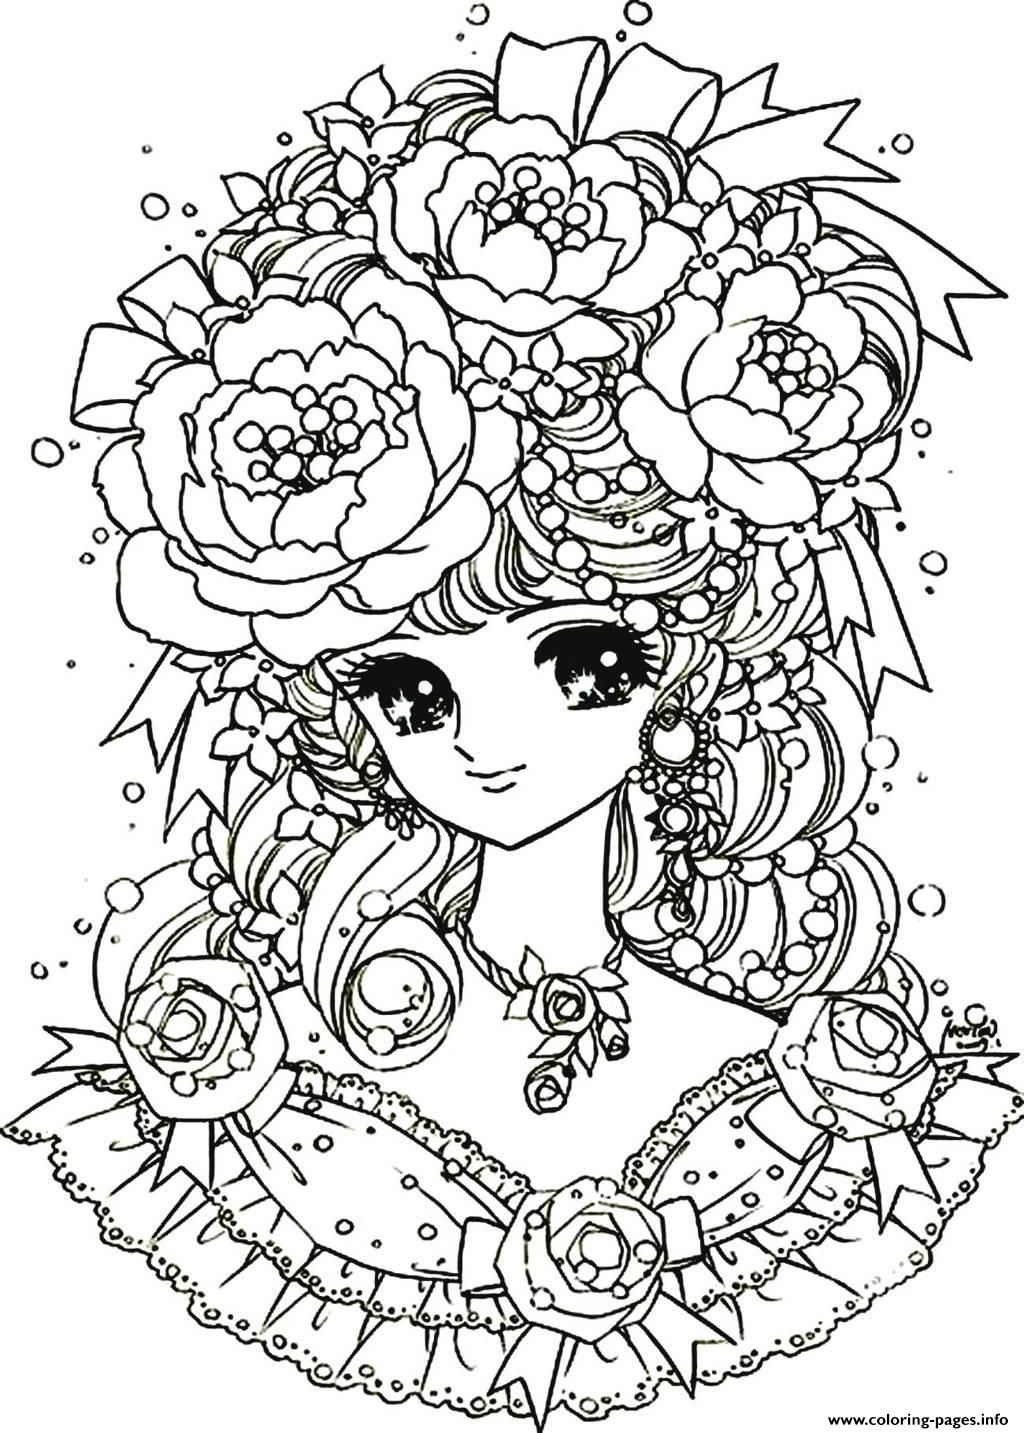 Print adult back to childhood manga girl flowers Coloring pages